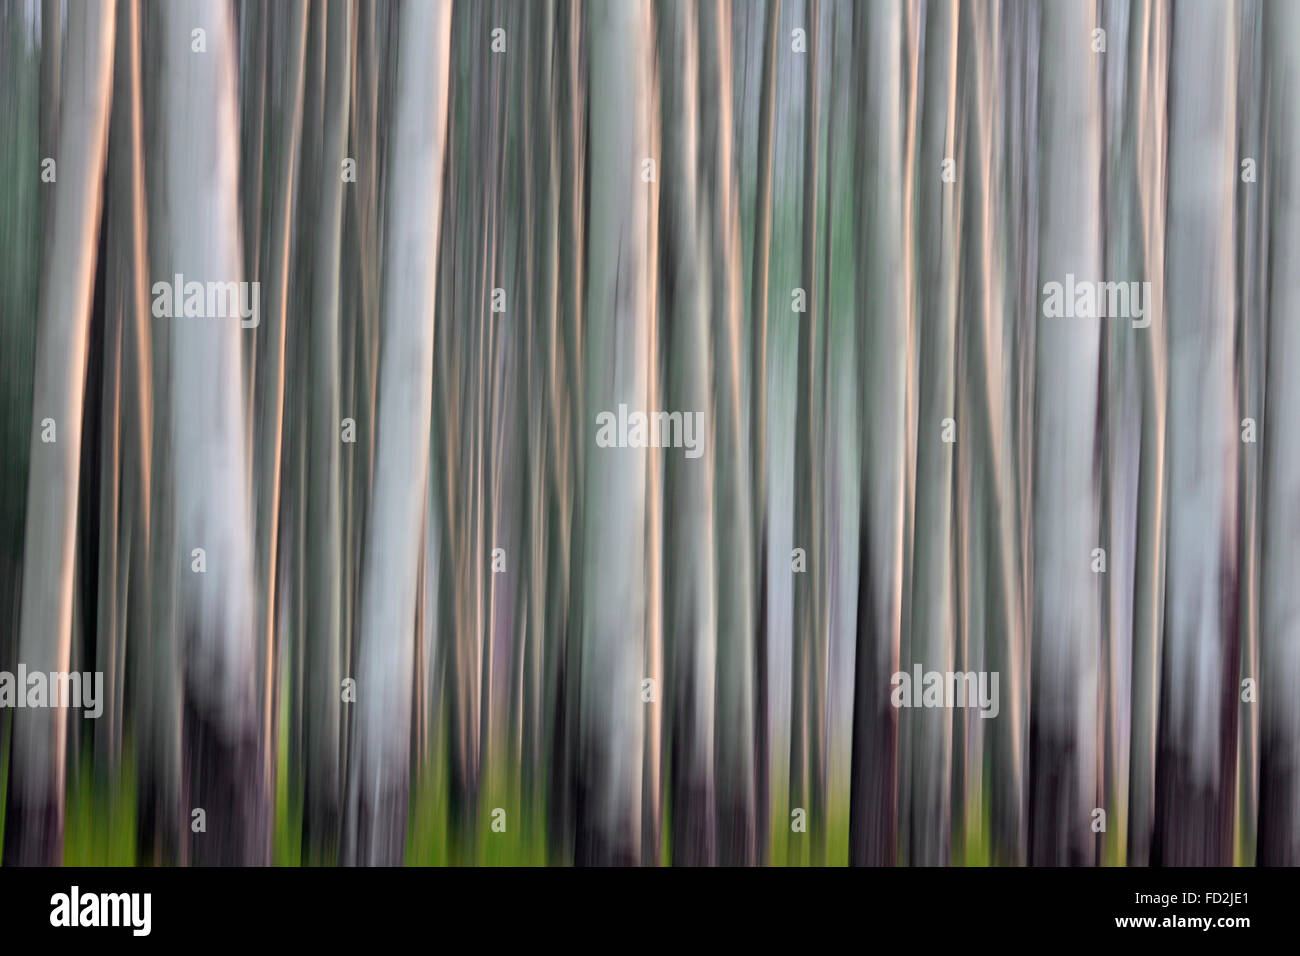 Abstract image of motion blurred aspen tree trunks in forest Stock Photo